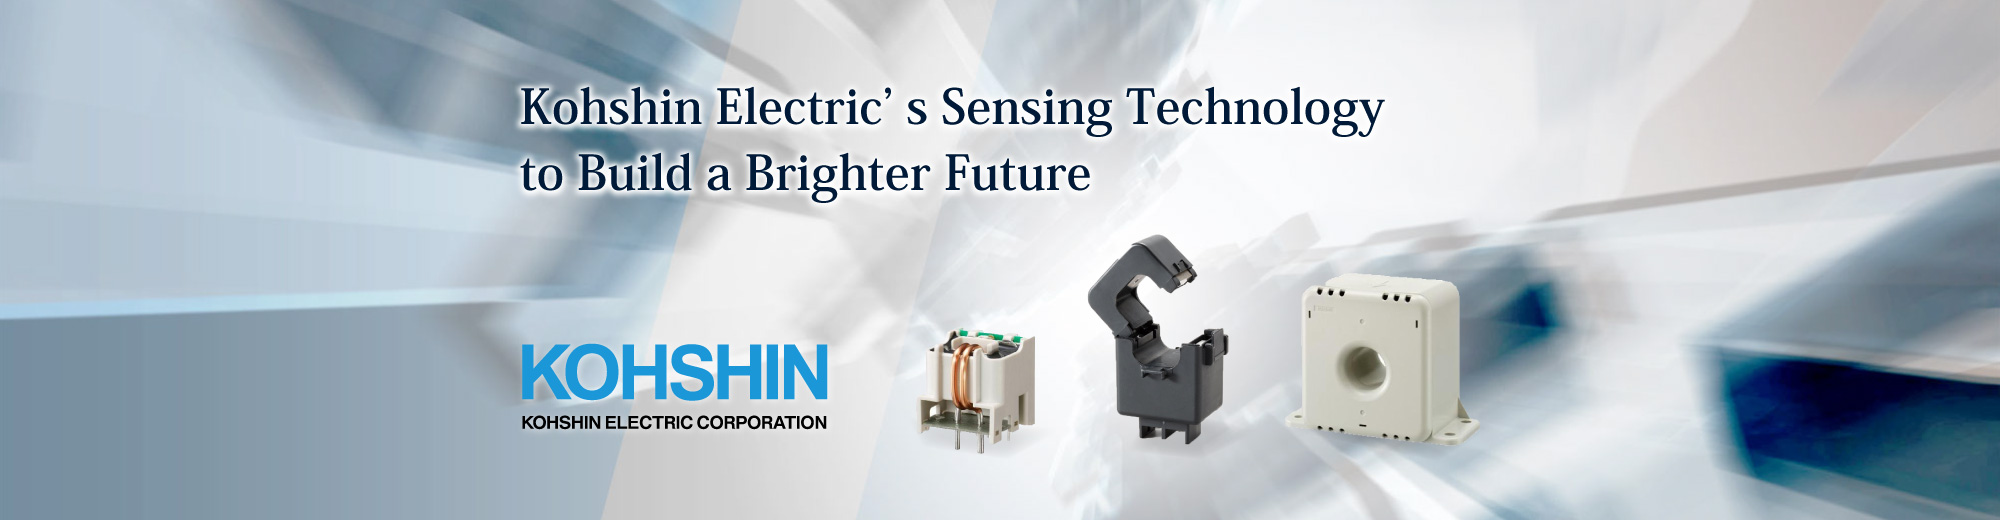 Kohshin Electric’ s Sensing Technology to Build a Brighter Future